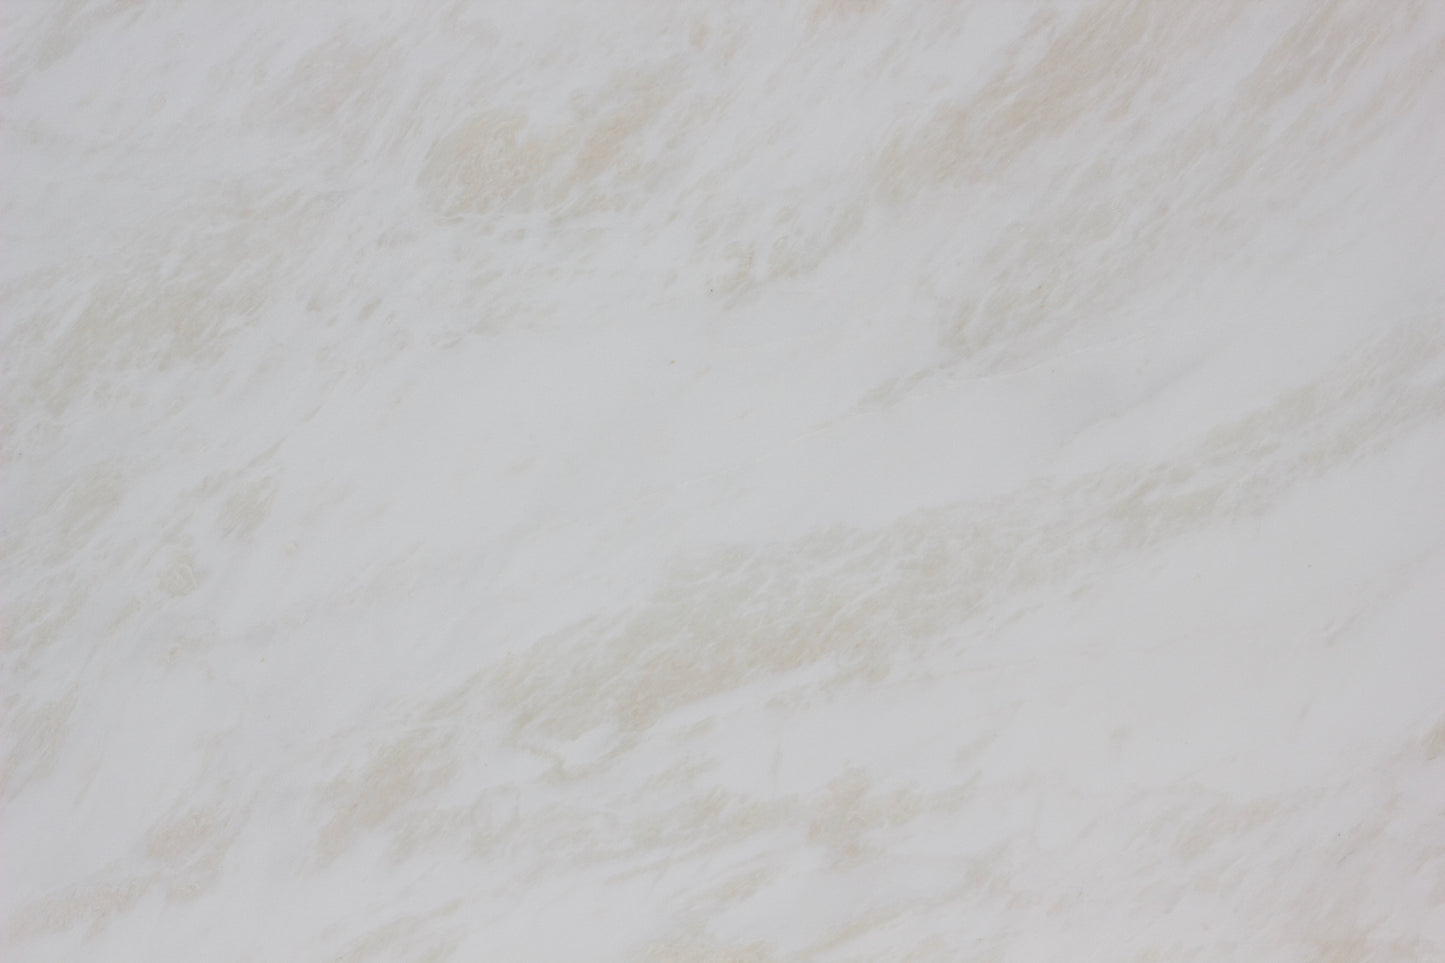 Mystery White - Lot 1319 - 124x77